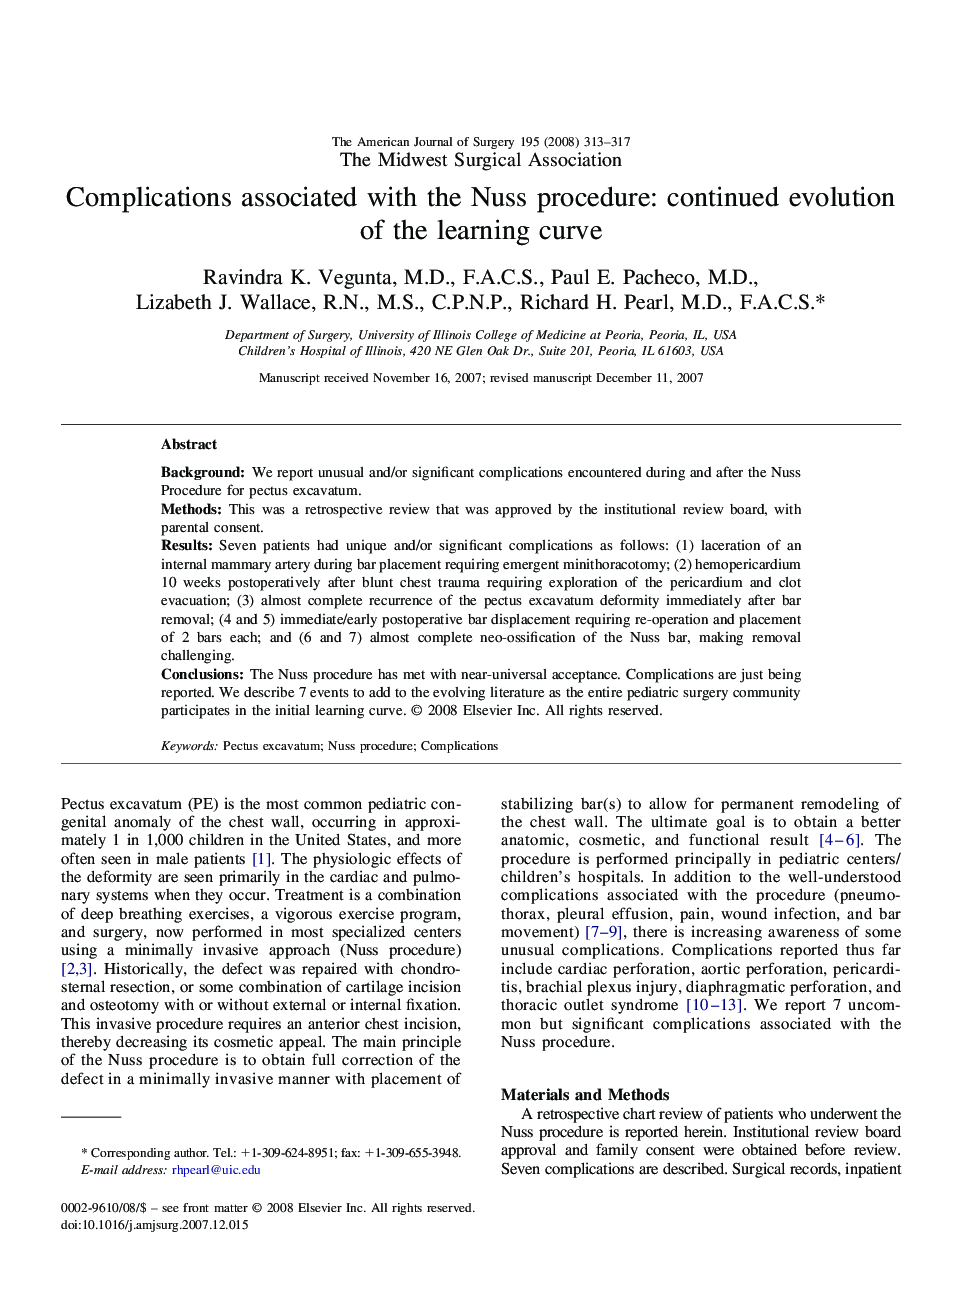 Complications associated with the Nuss procedure: continued evolution of the learning curve